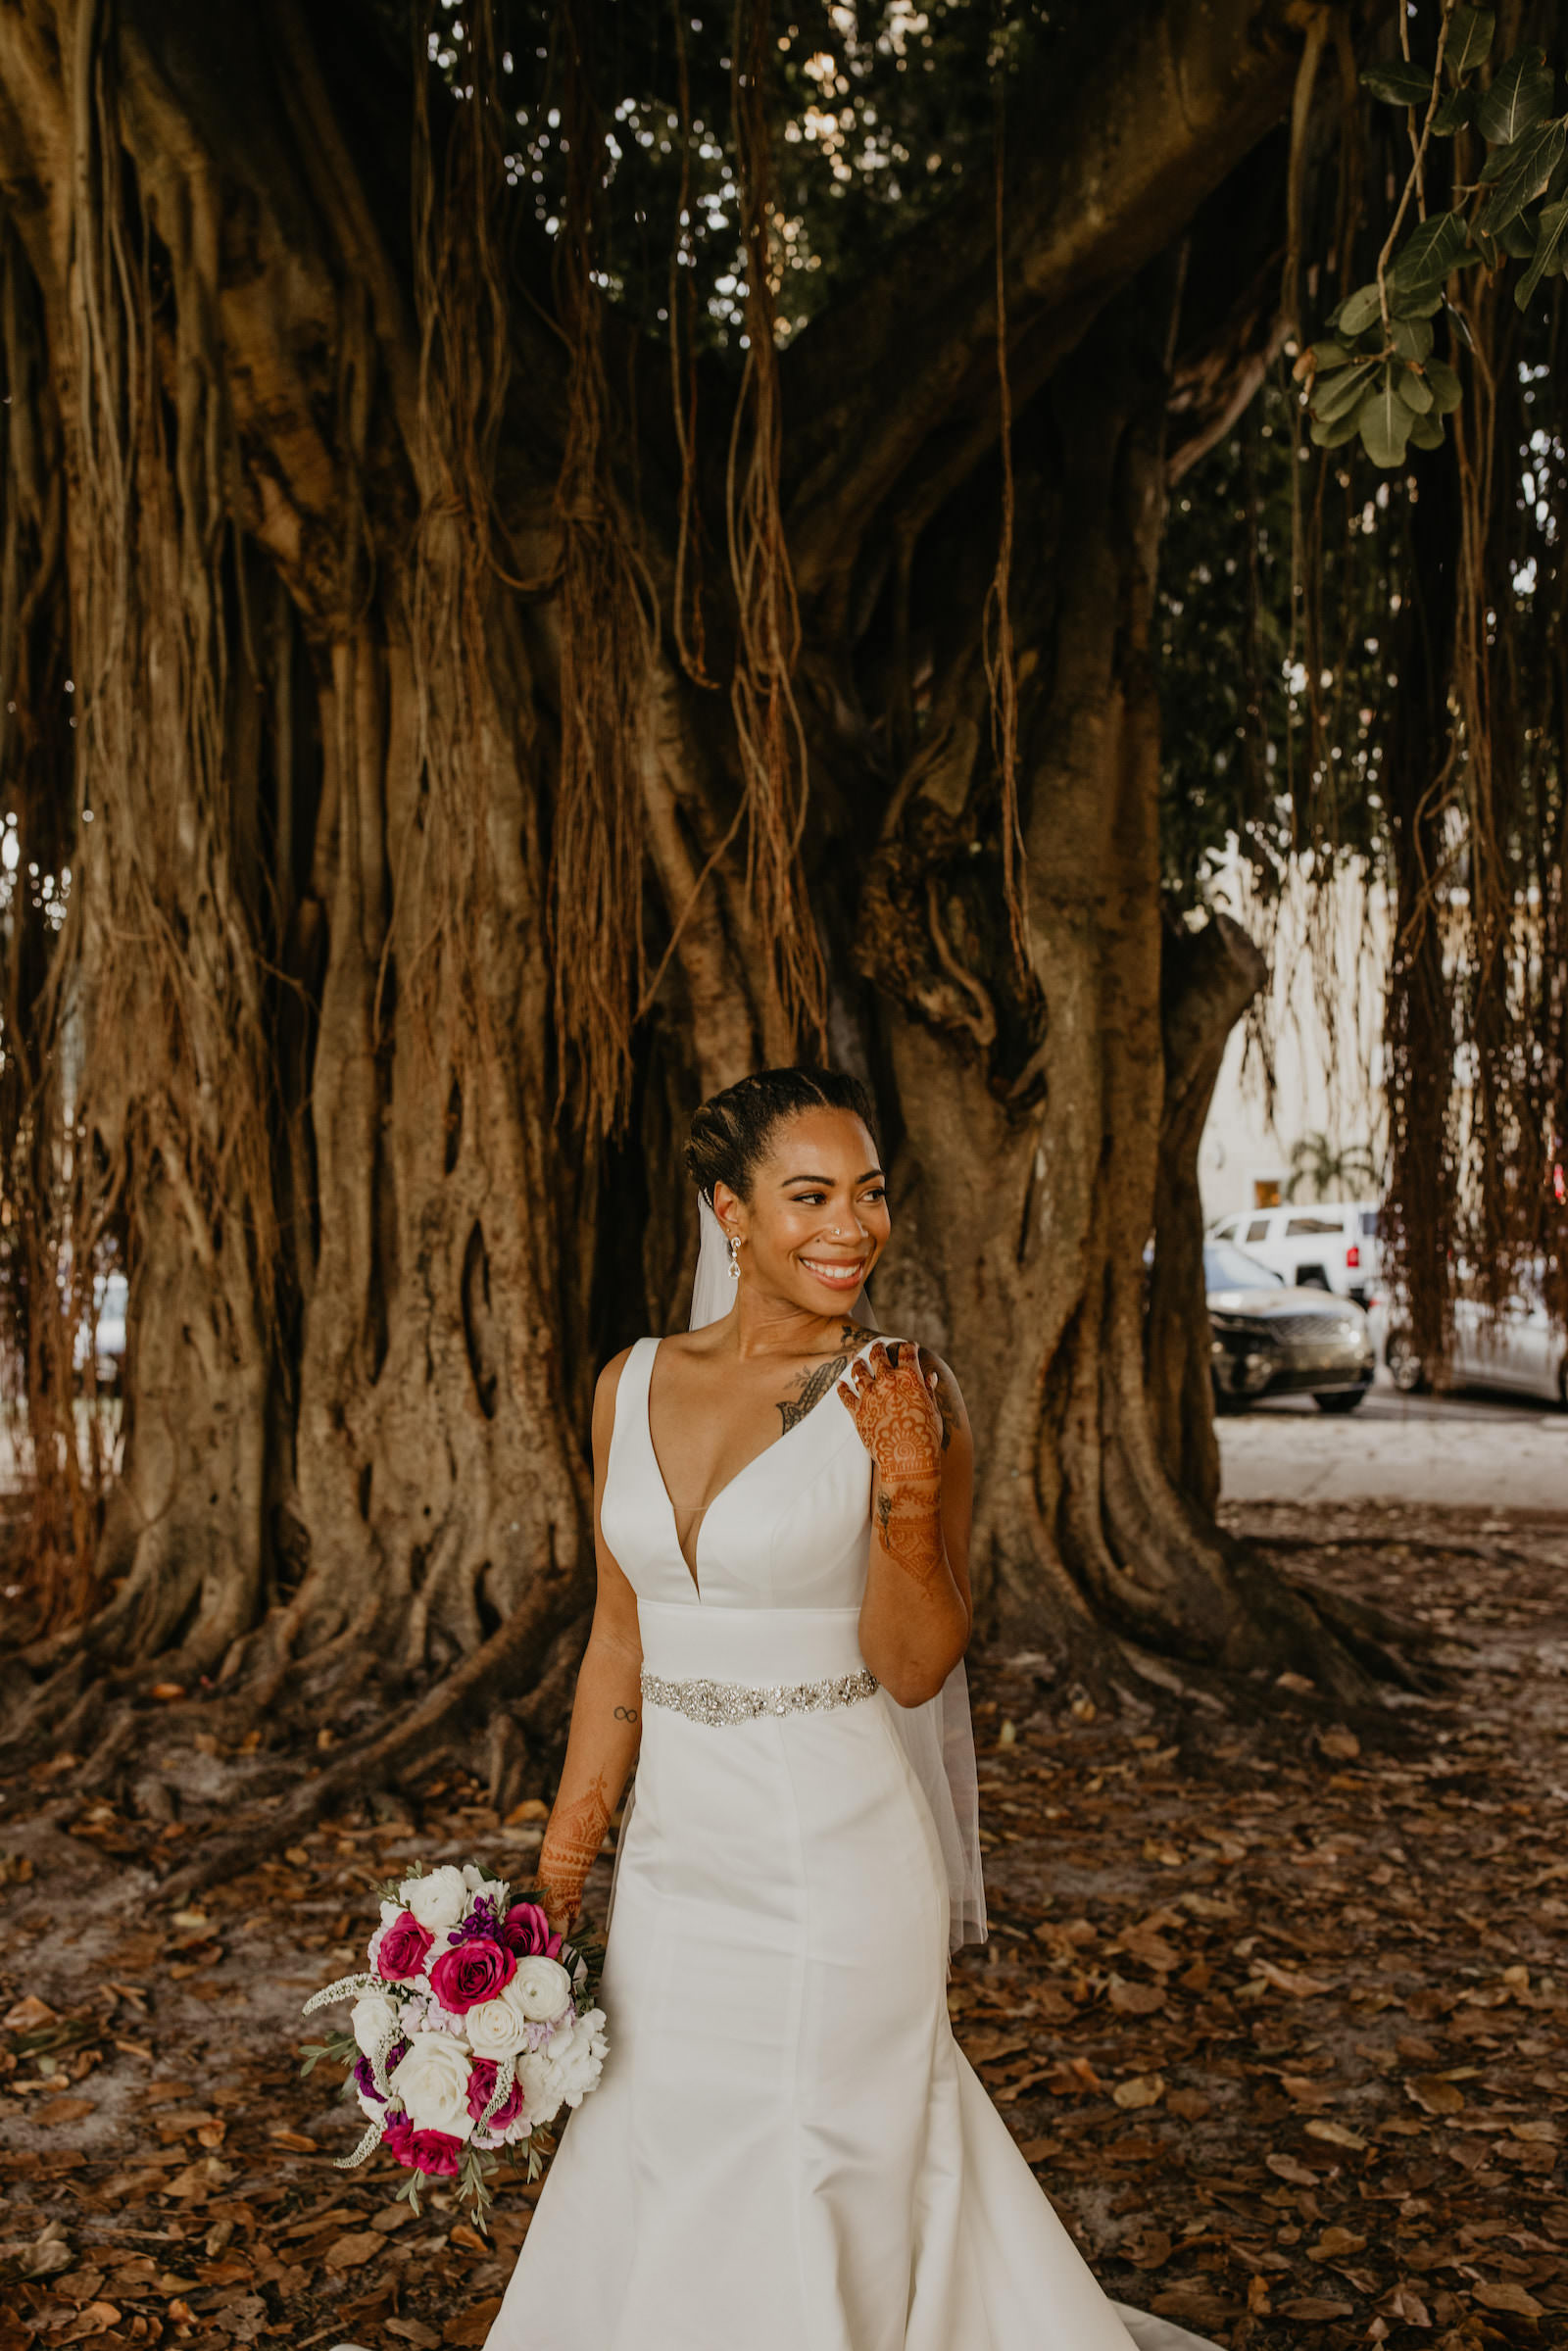 Intimate Elopement Wedding, Bride with Henna Tattoo Wearing Plunging V Neckline Fitted Wedding Dress with Rhinestone Crystal Belt Holding White and Pink Floral Bouquet | Tampa Bay Wedding Planner Elope Tampa Bay